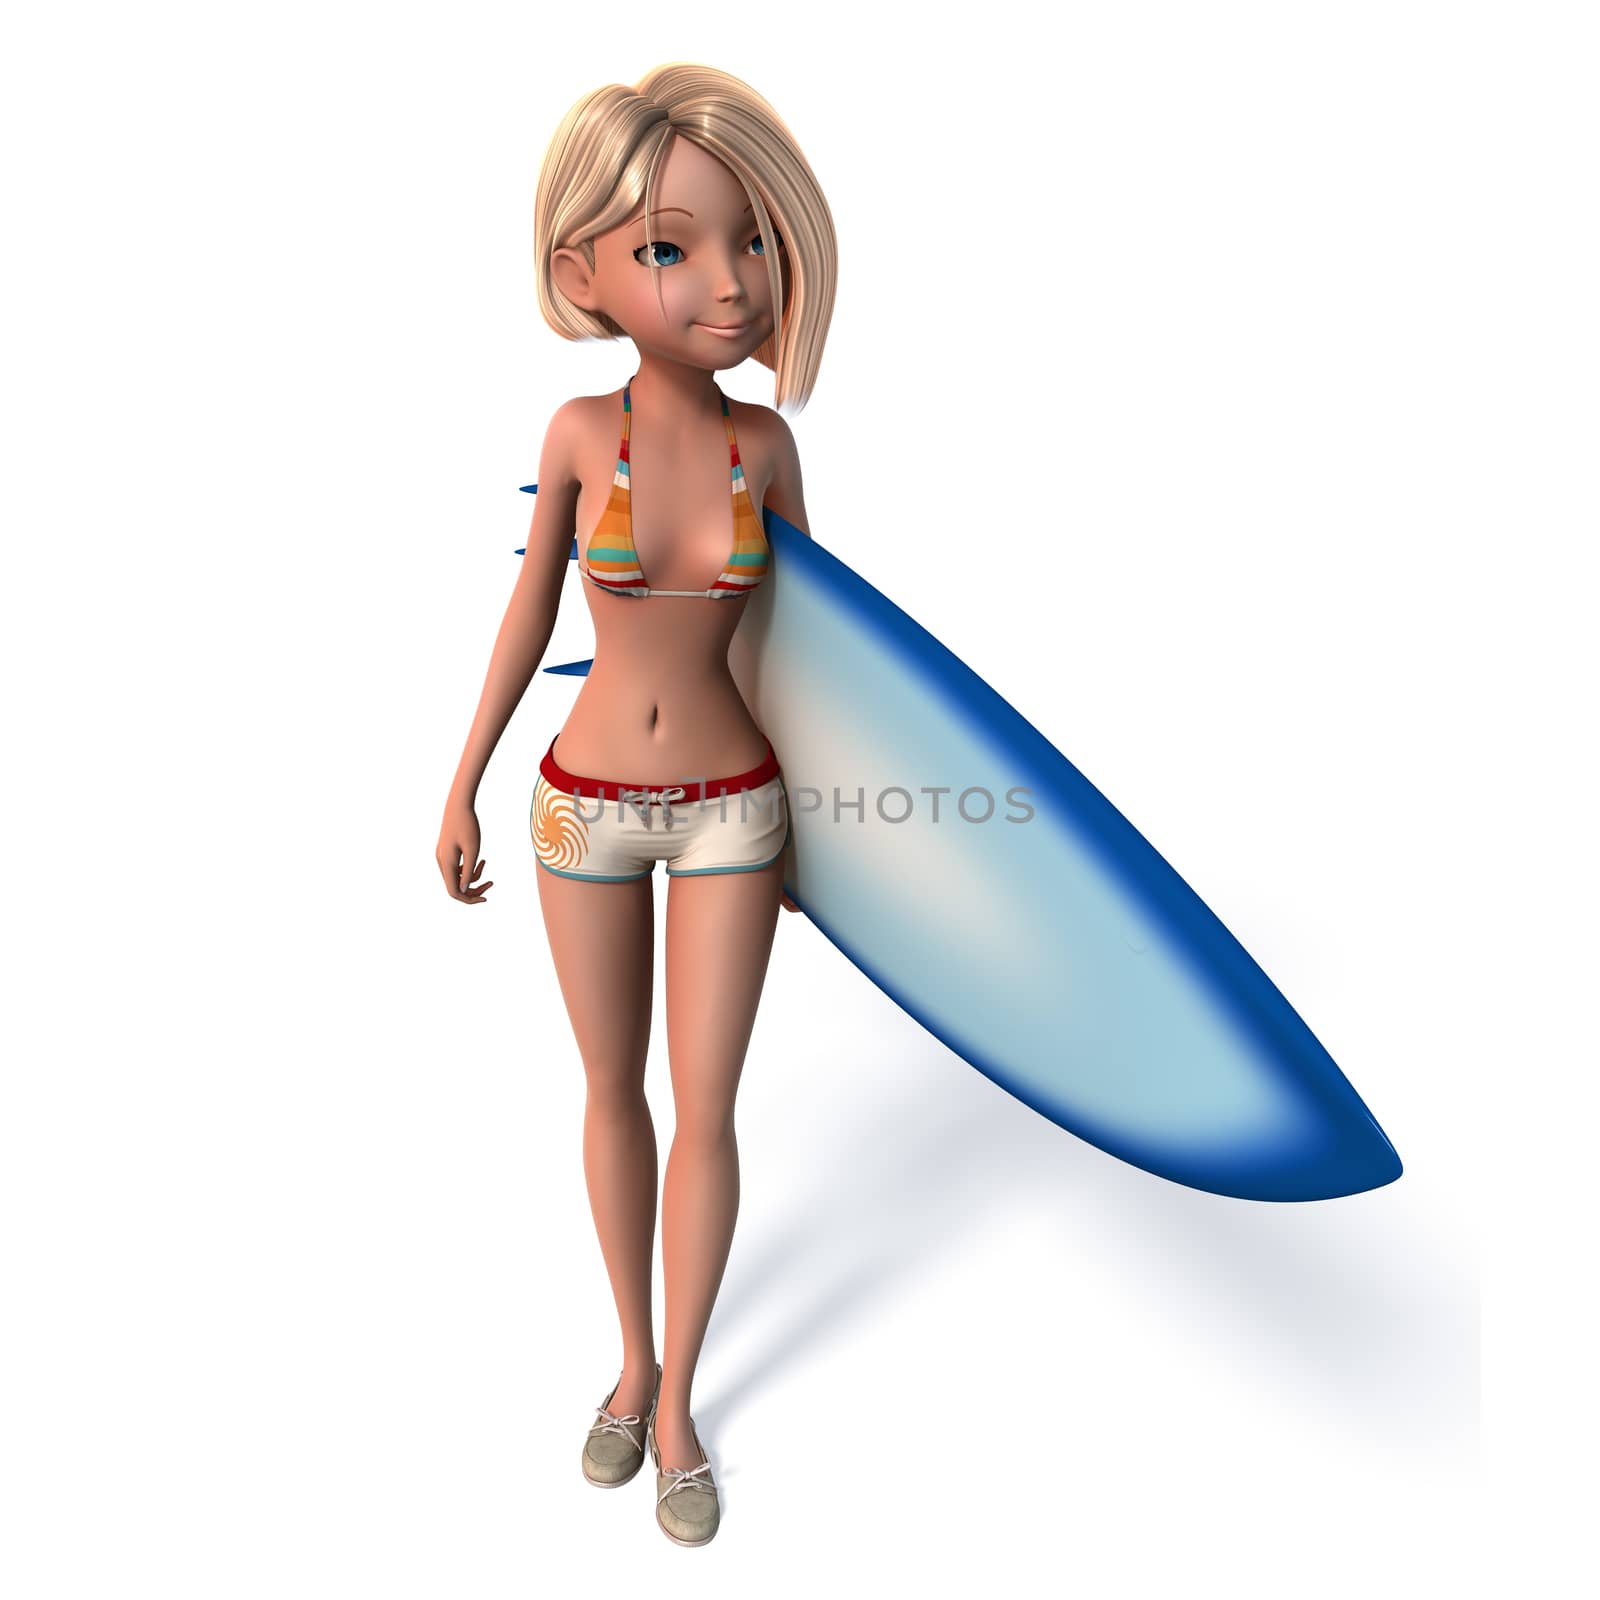 A young girl in a bathing suit with a board for windsurfing